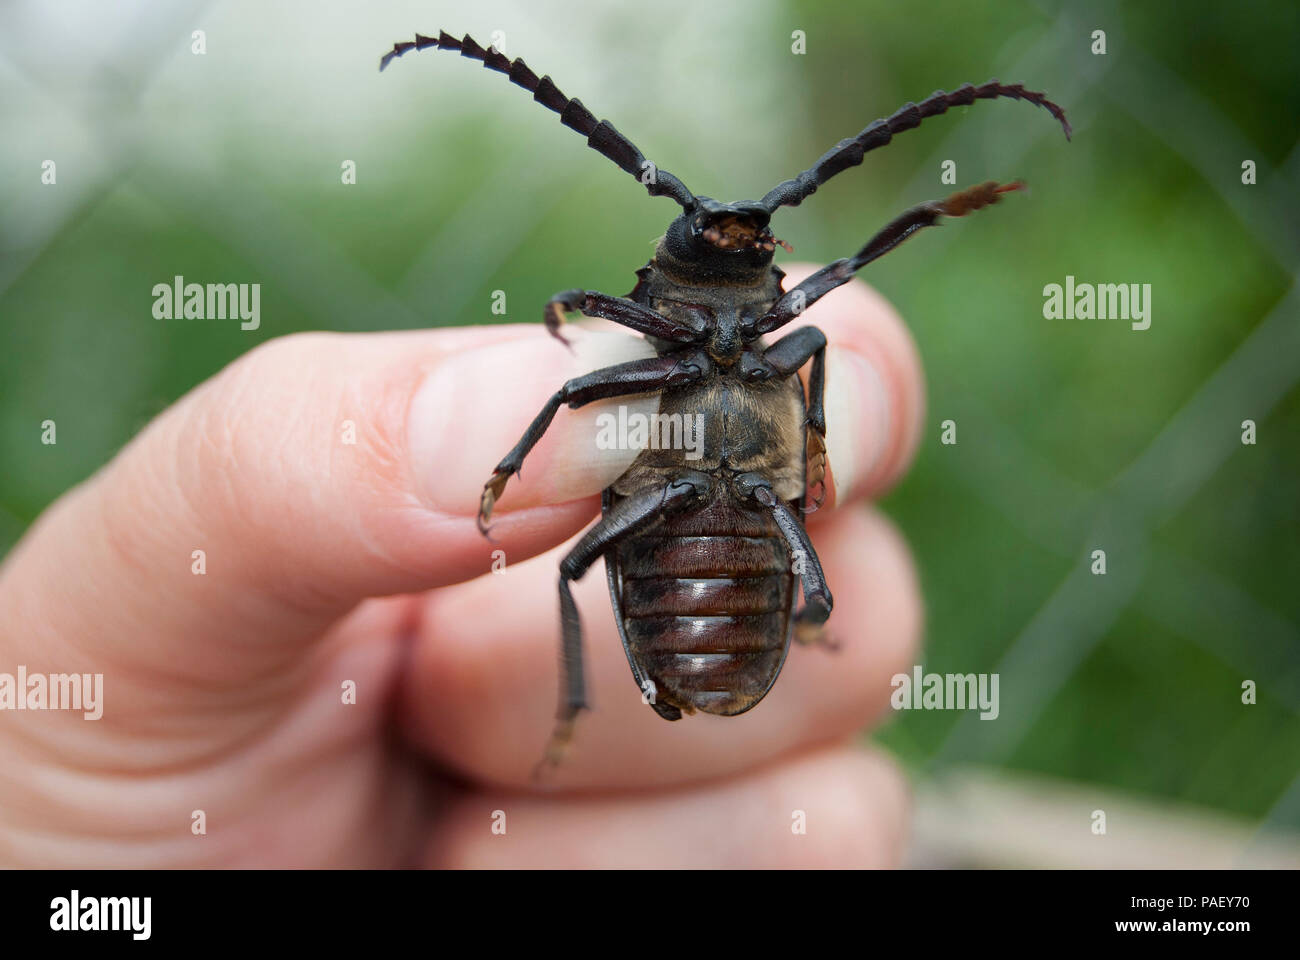 Large black beetle barbel (Prionus coriarius) in the fingers of the hand. View from the side of the abdomen. Stock Photo